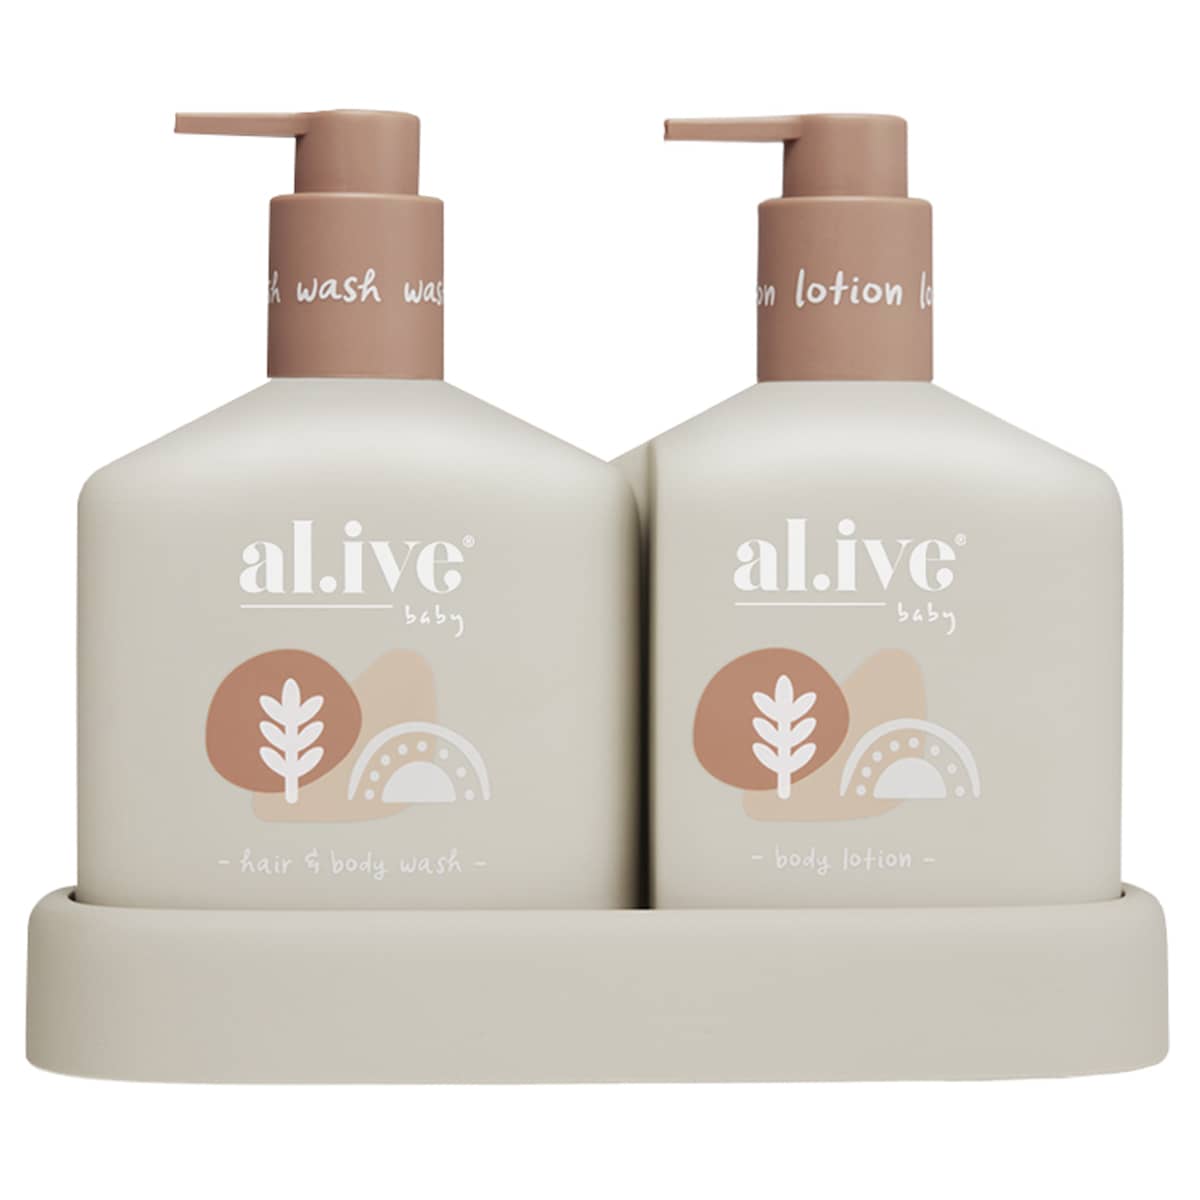 al.ive body Baby Duo - Hair/Body Wash and Lotion + Tray - Calming Oatmeal